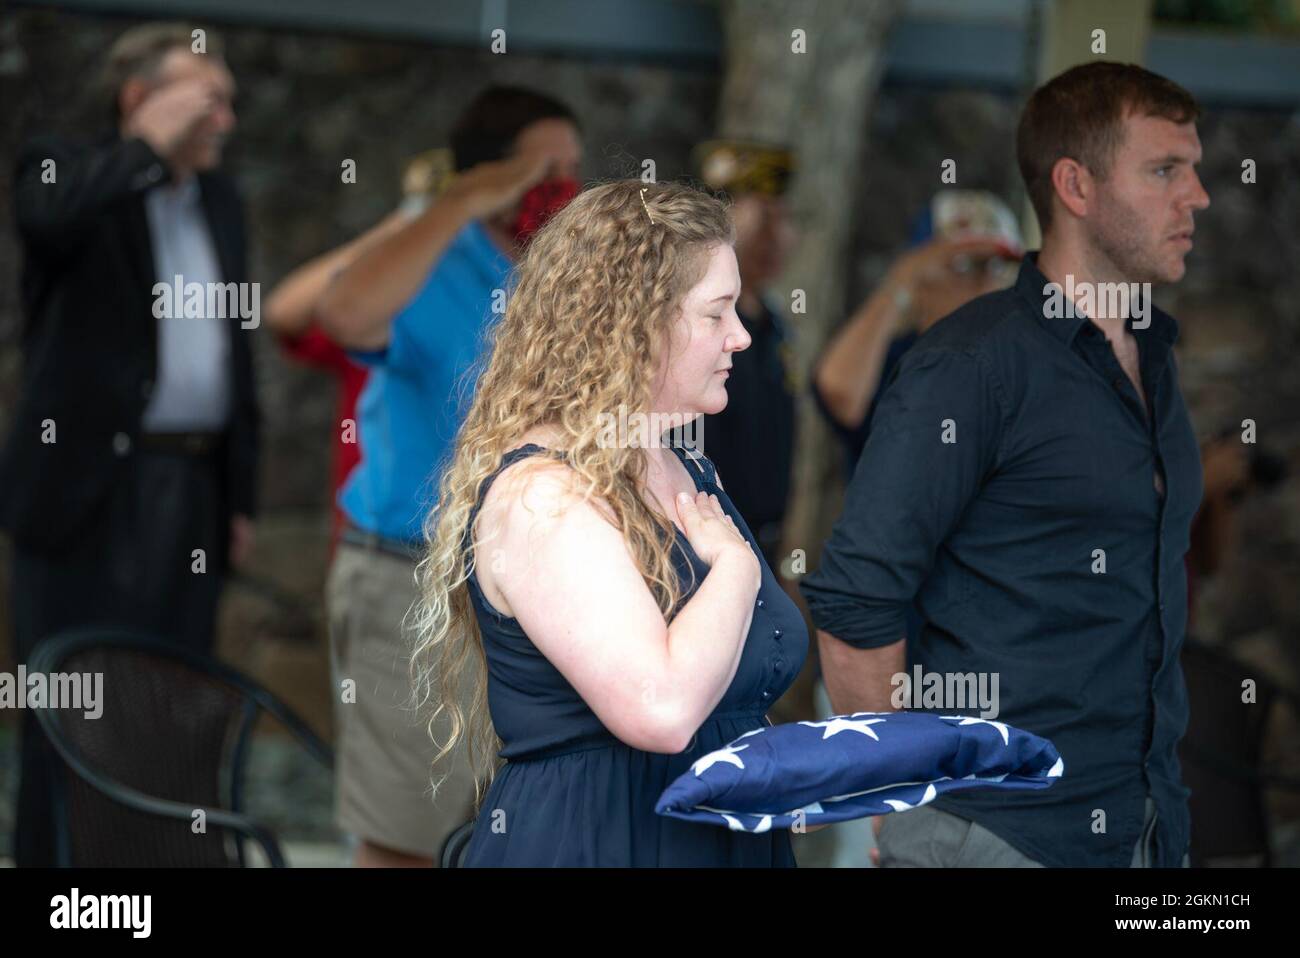 Sarah Adams, great-grandniece of U.S. Navy Gunner’s Mate 3rd Class Shelby Treadway, 25, of Manchester, Kentucky, places her hand on her heart after being presented a flag by sailors assigned to Navy Region Hawaii during her granduncle's funeral at the National Memorial Cemetery of the Pacific, Honolulu, Hawaii, June 2, 2021. Treadway was assigned to the USS Oklahoma, which sustained fire from Japanese aircraft and multiple torpedo hits causing the ship to capsize and resulted in the deaths of more than 400 crew members on Dec. 7, 1941, at Ford Island, Pearl Harbor. Treadway was recently identi Stock Photo